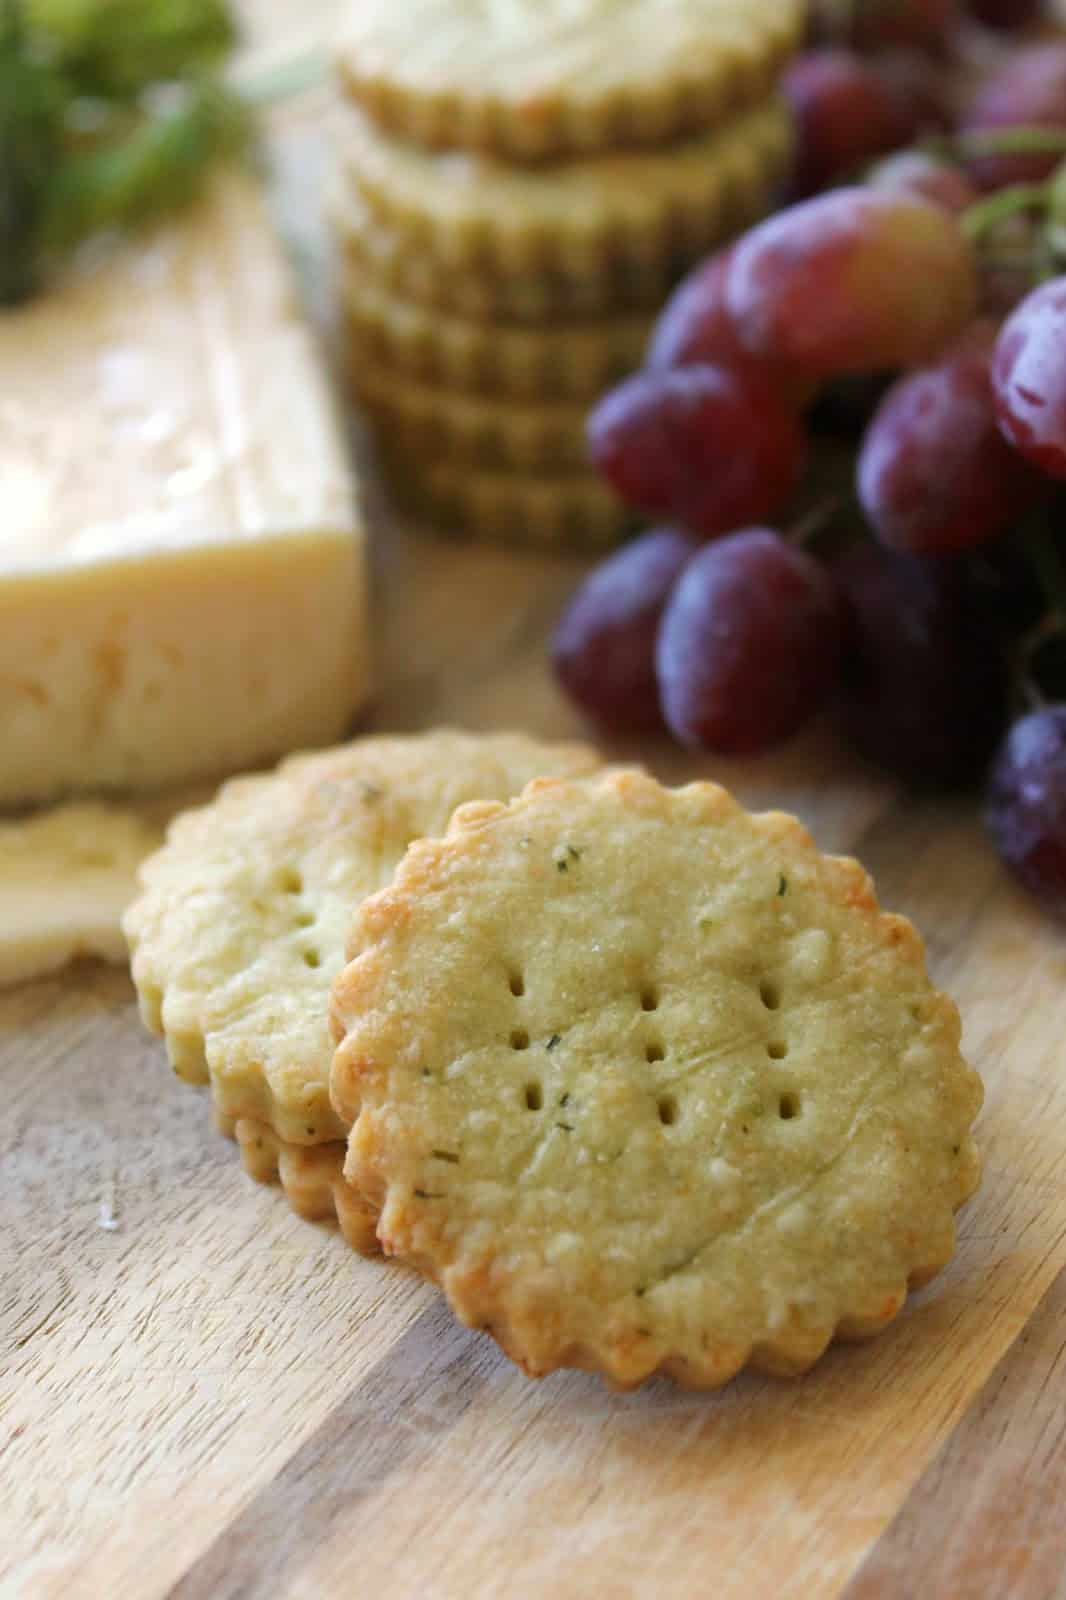 Close up of cheese wafers to show texture with cheese board items in background.